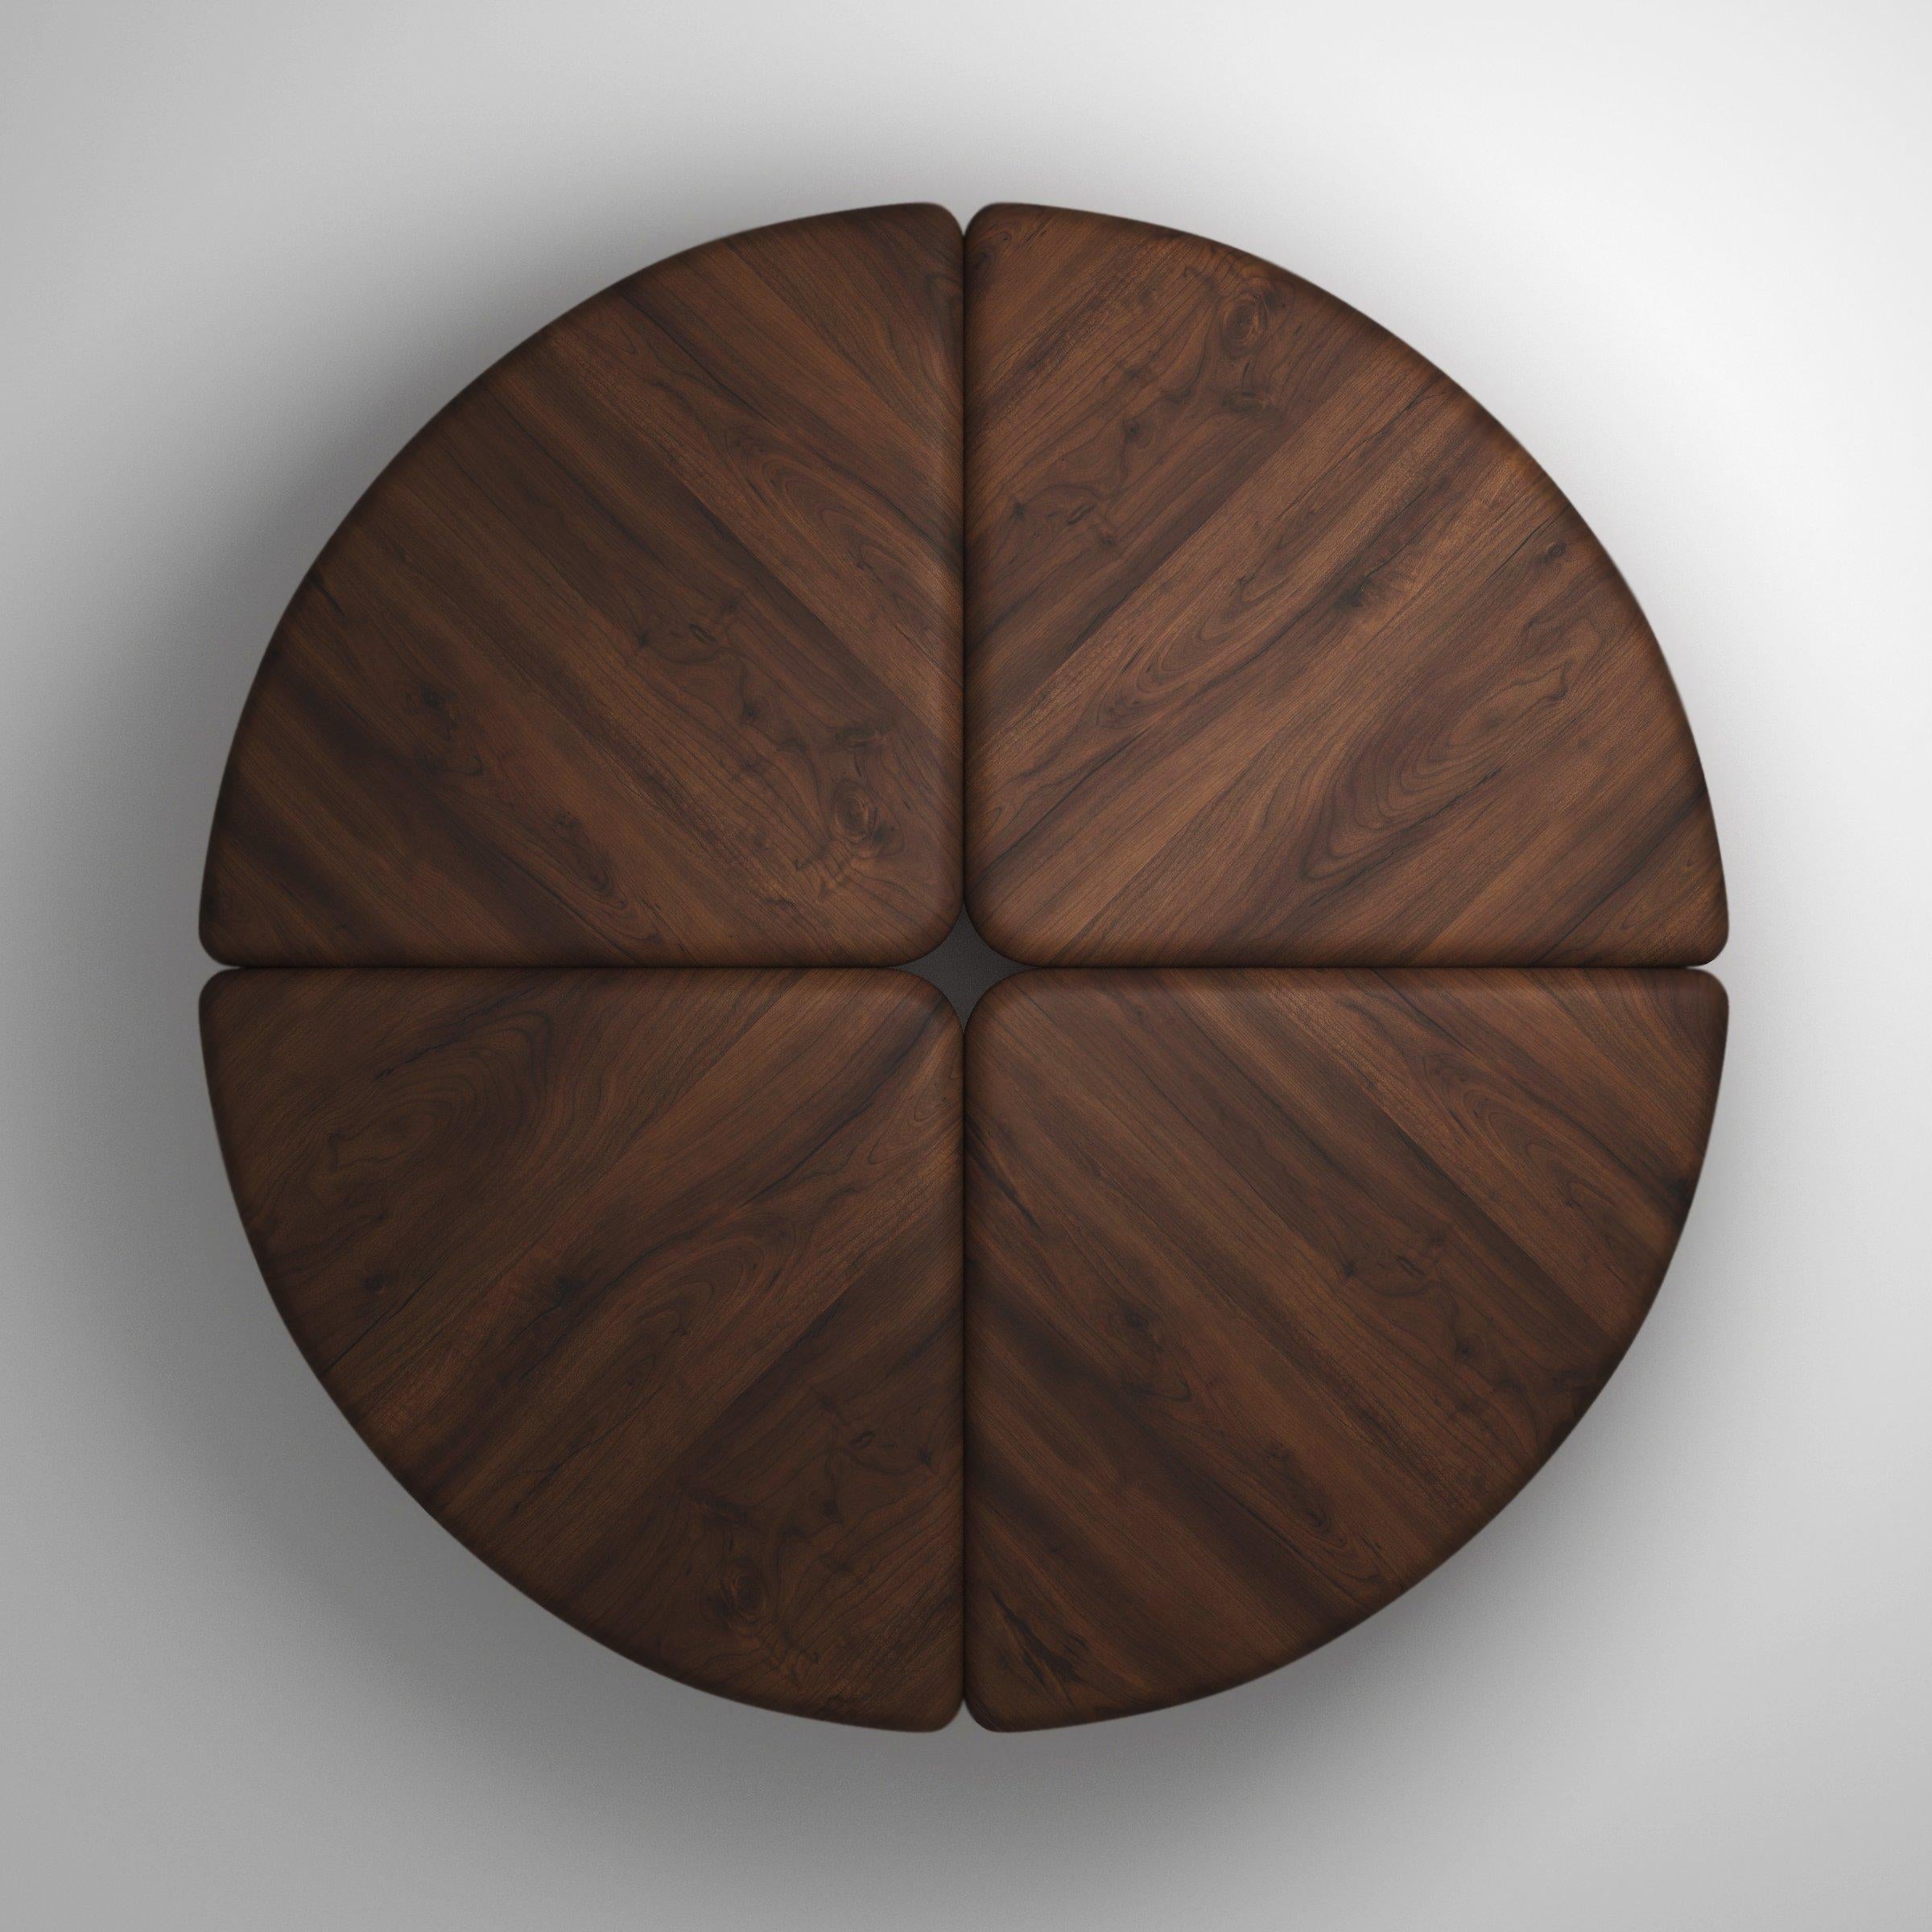 A coffee table handmade out of 30 mm thick solid Canaletto Walnut wood. Inspired by lily pads and their curled edges, it’s divided in 4 quarters, with each part’s rounded edges juxtaposed to the adjacent parts’ edges. Available in any size and